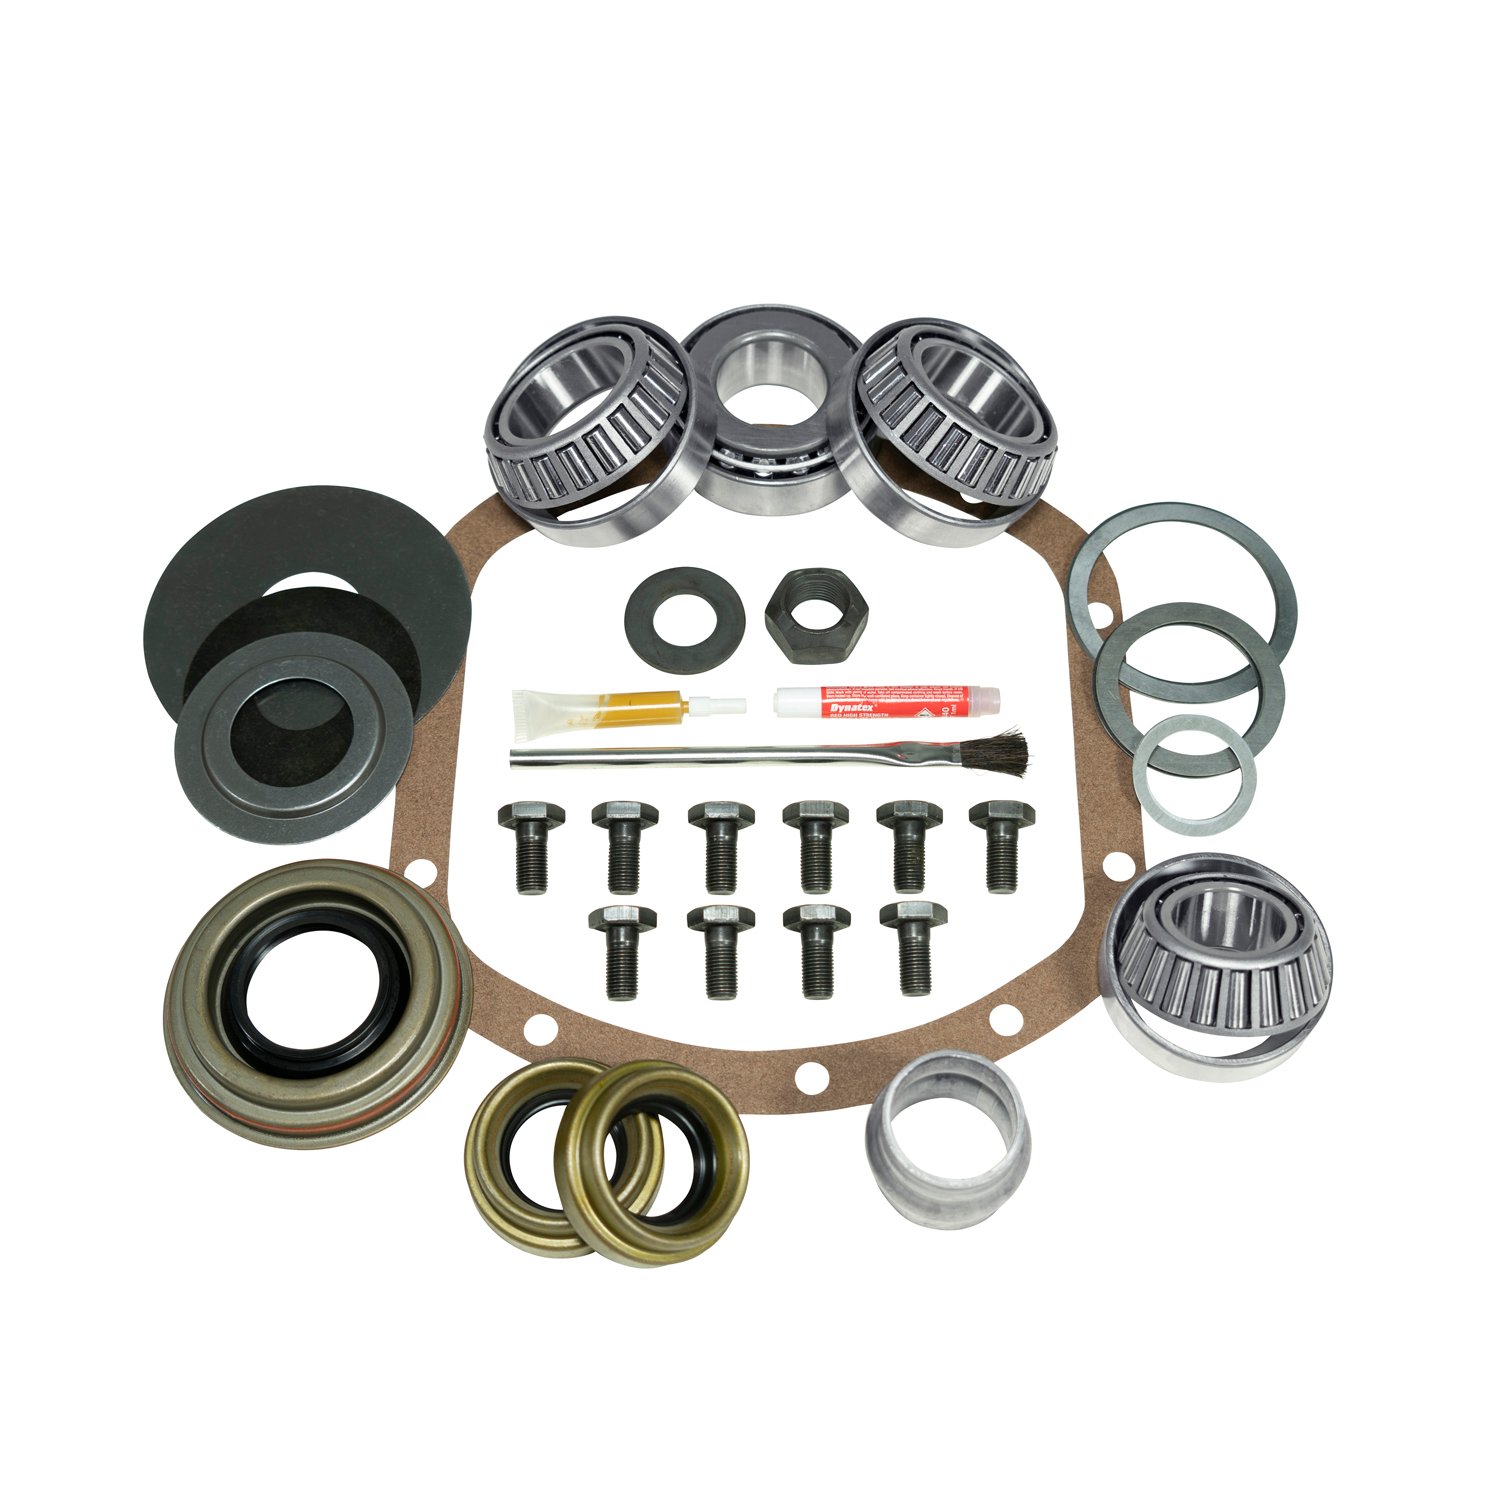 USA Standard 37129 Master Overhaul Kit, Front Differential, 01-05 Ford Dana Super 30